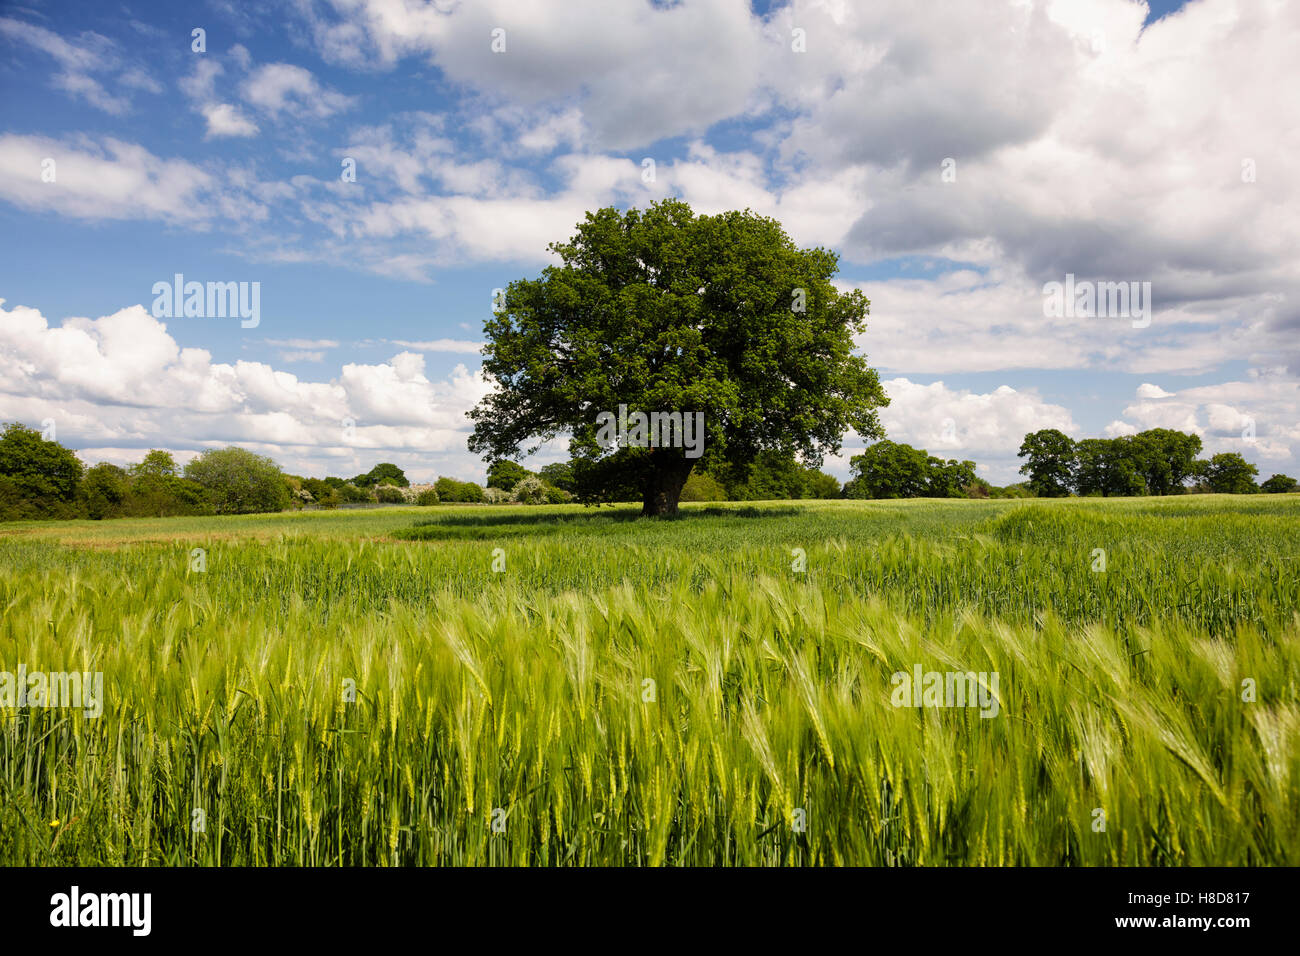 Large single oak tree in a field of young green barley under a summer sky Stock Photo